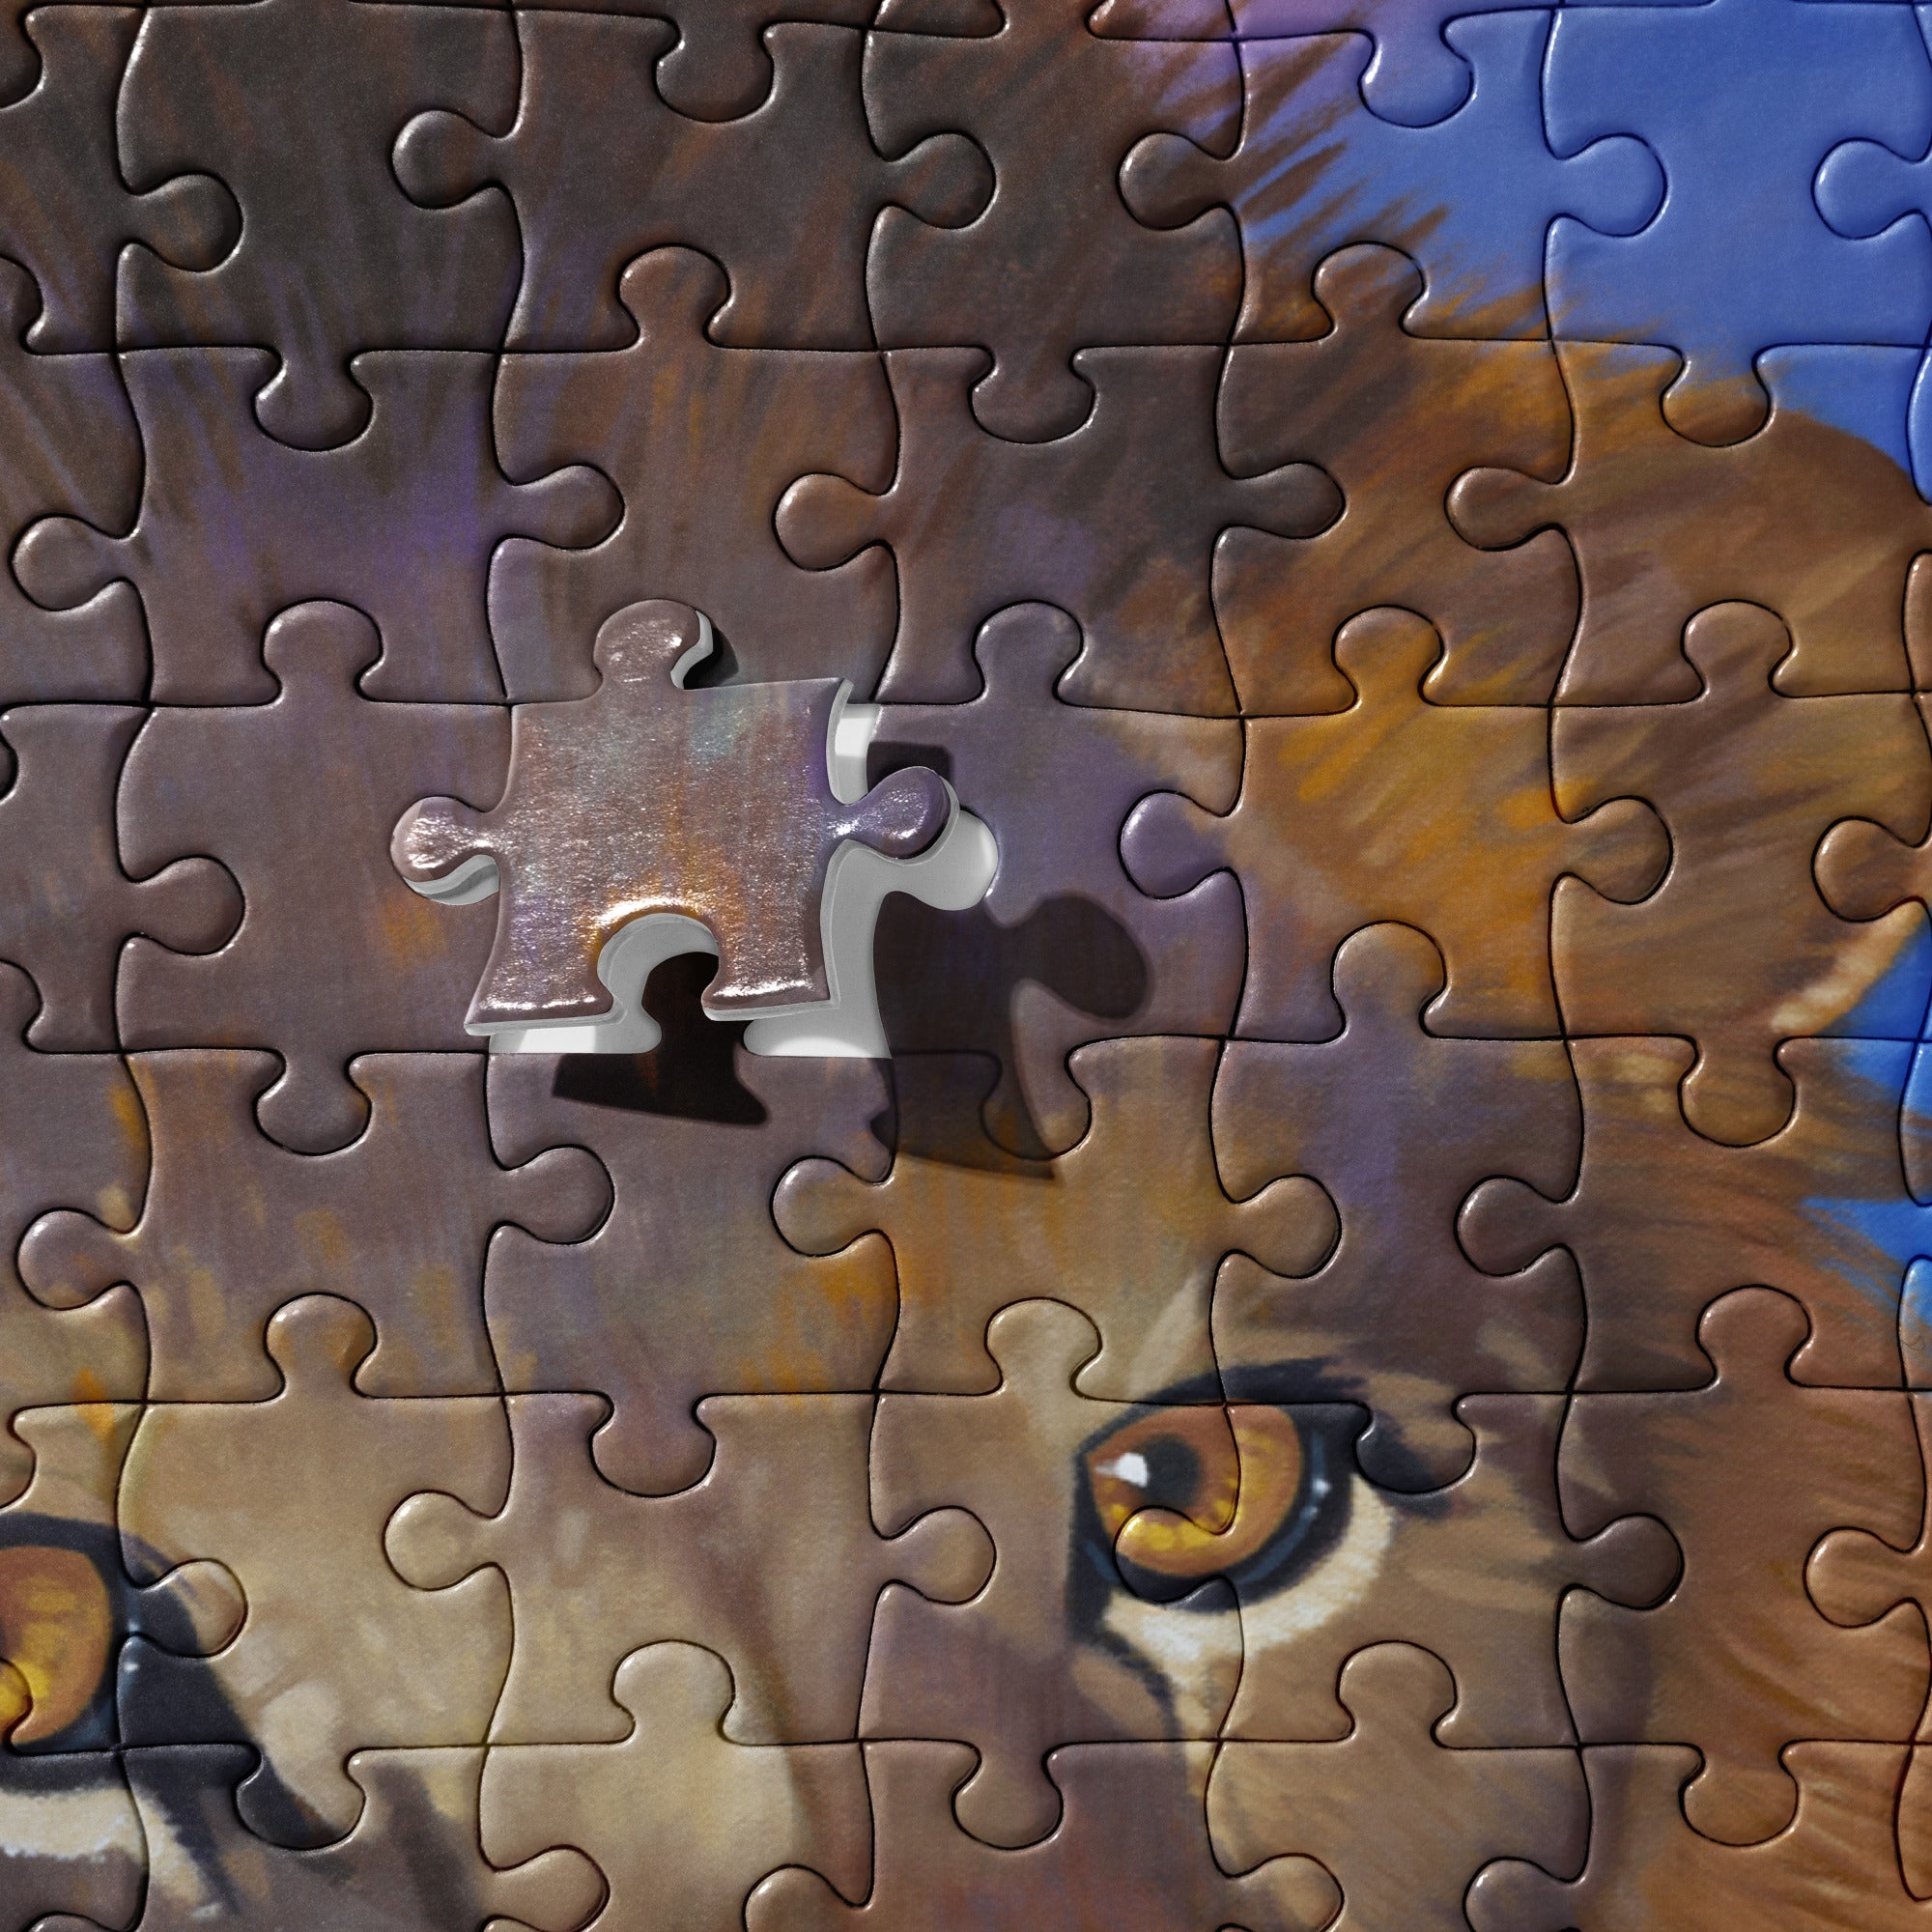 The Burger King Jigsaw Puzzle